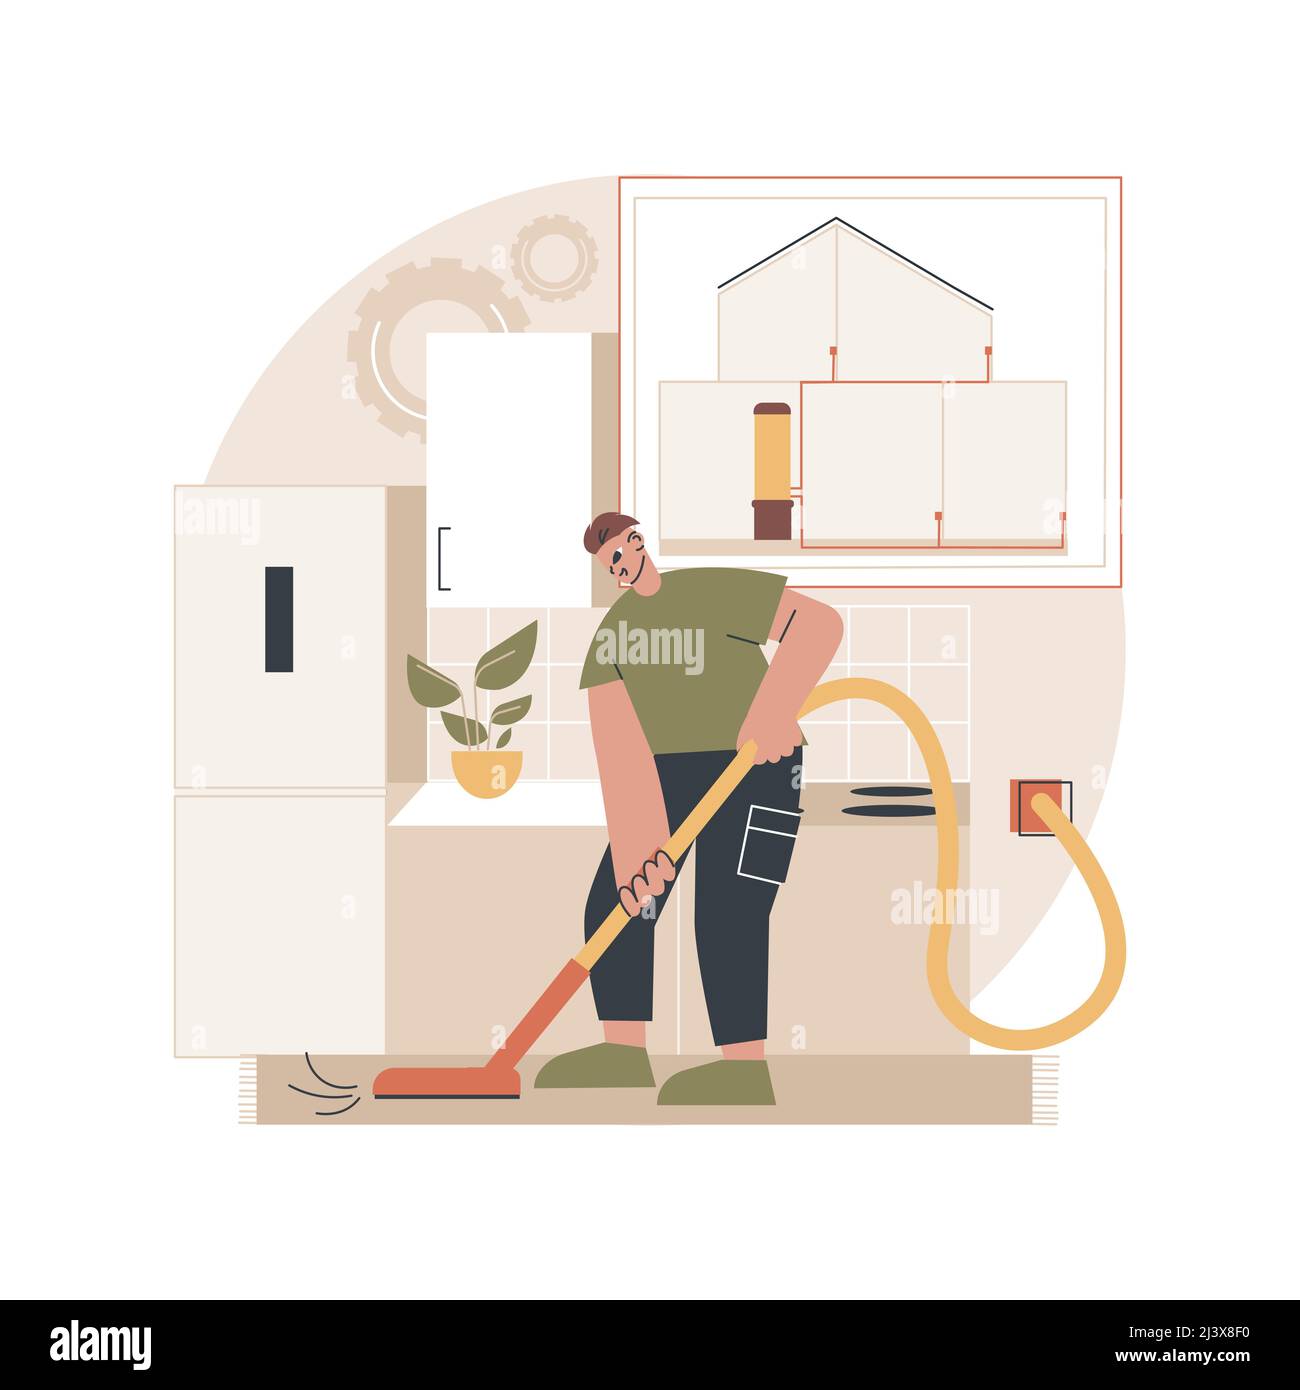 Central vacuum system abstract concept vector illustration. House appliance, remove dirt, central vacuum installation, home cleaning, filter bag, cont Stock Vector